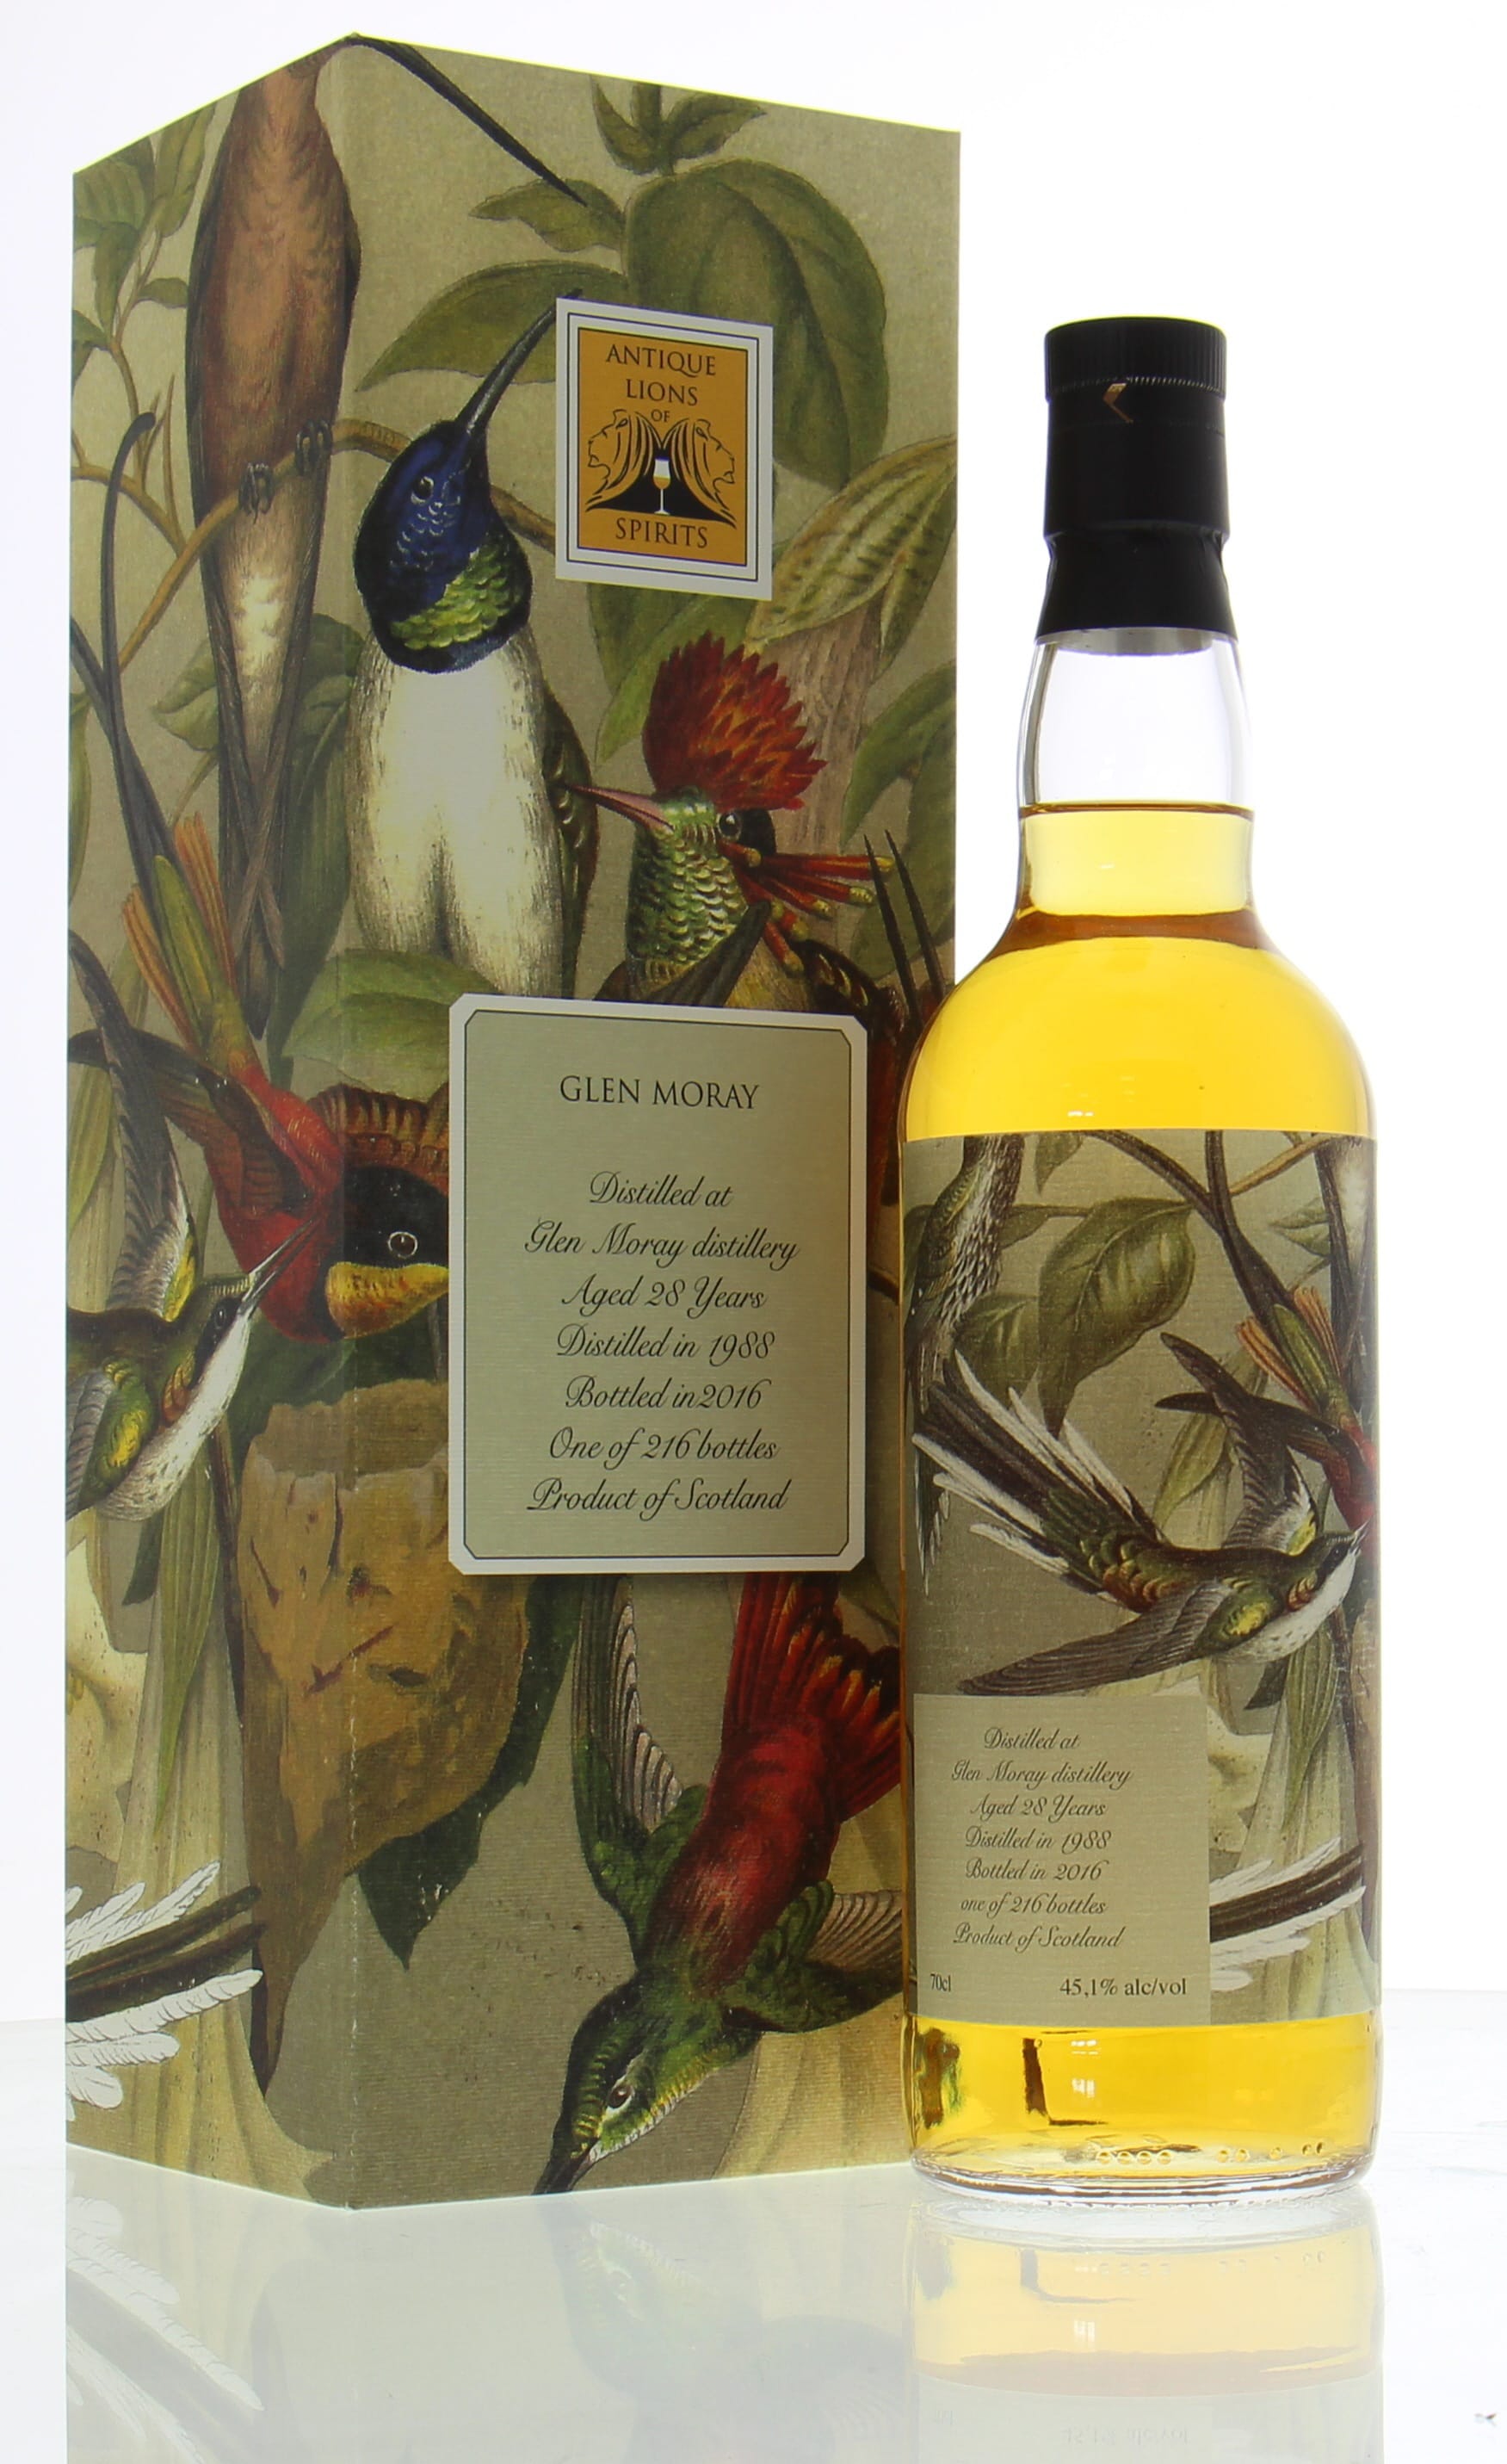 Glen Moray - 28 years Old Antique Lions of Spirits The Birds 45.1% 1988 In Original Container